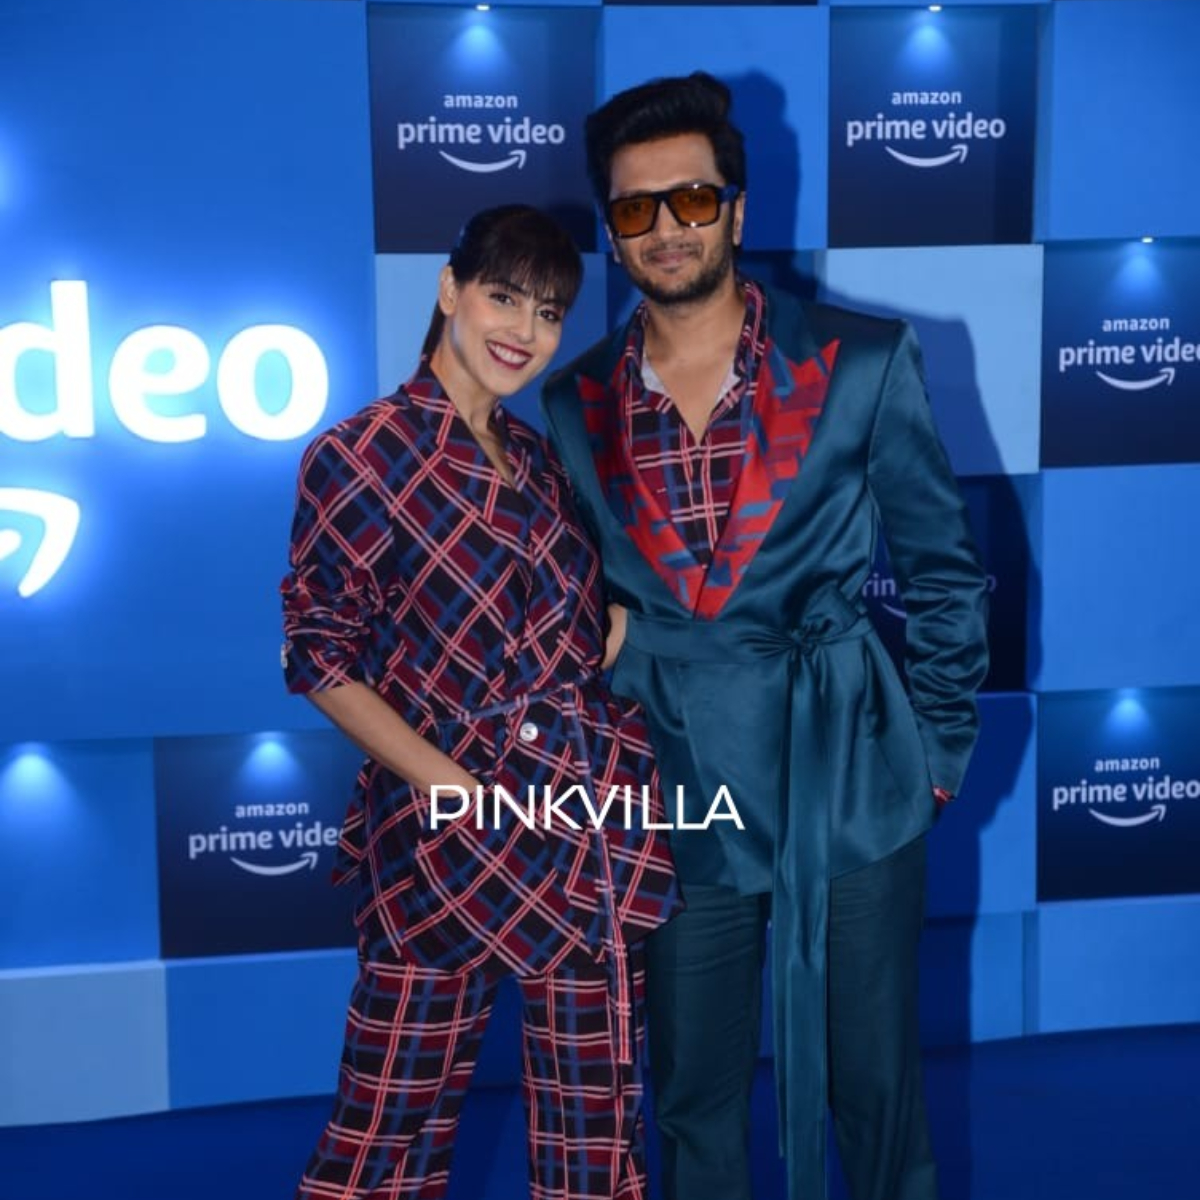 Riteish Deshmukh & Genelia D'Souza exude charm in twinning outfits, Jim Sarbh serves looks at an event